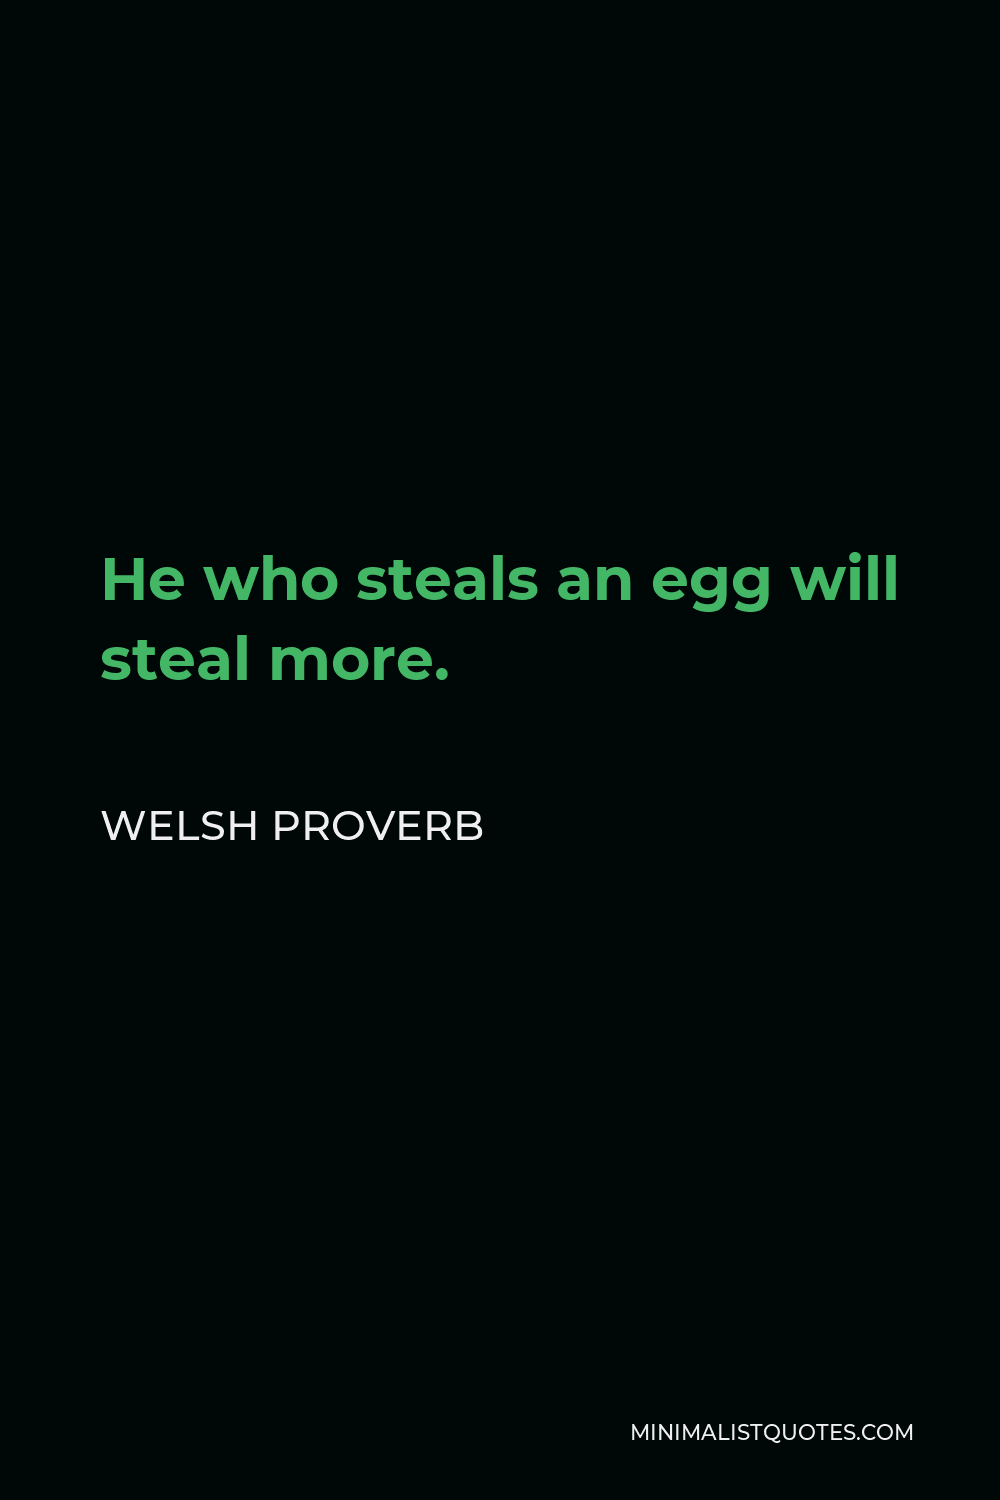 Welsh Proverb Quote - He who steals an egg will steal more.